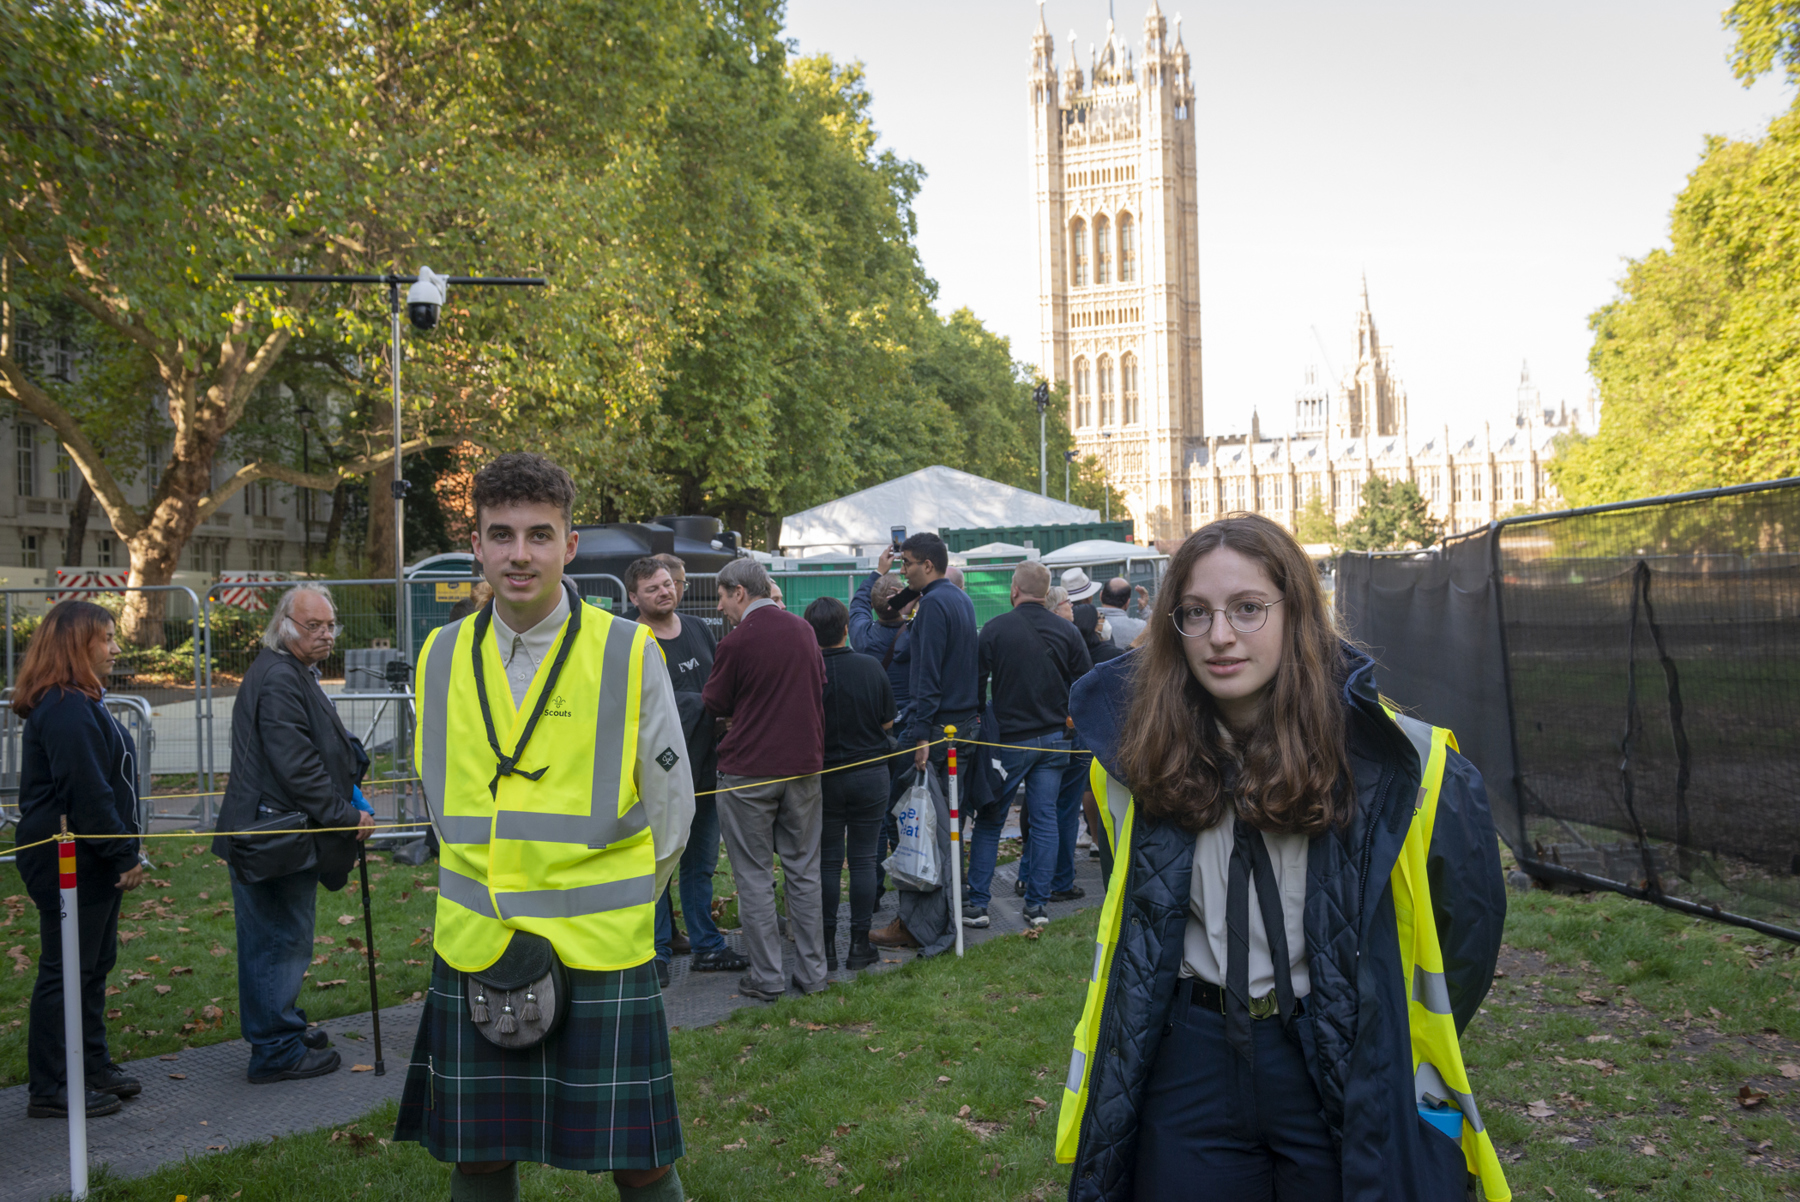 Two Scouts in hi-vis jackets smile at the camera while standing in front of Westminster Abbey.